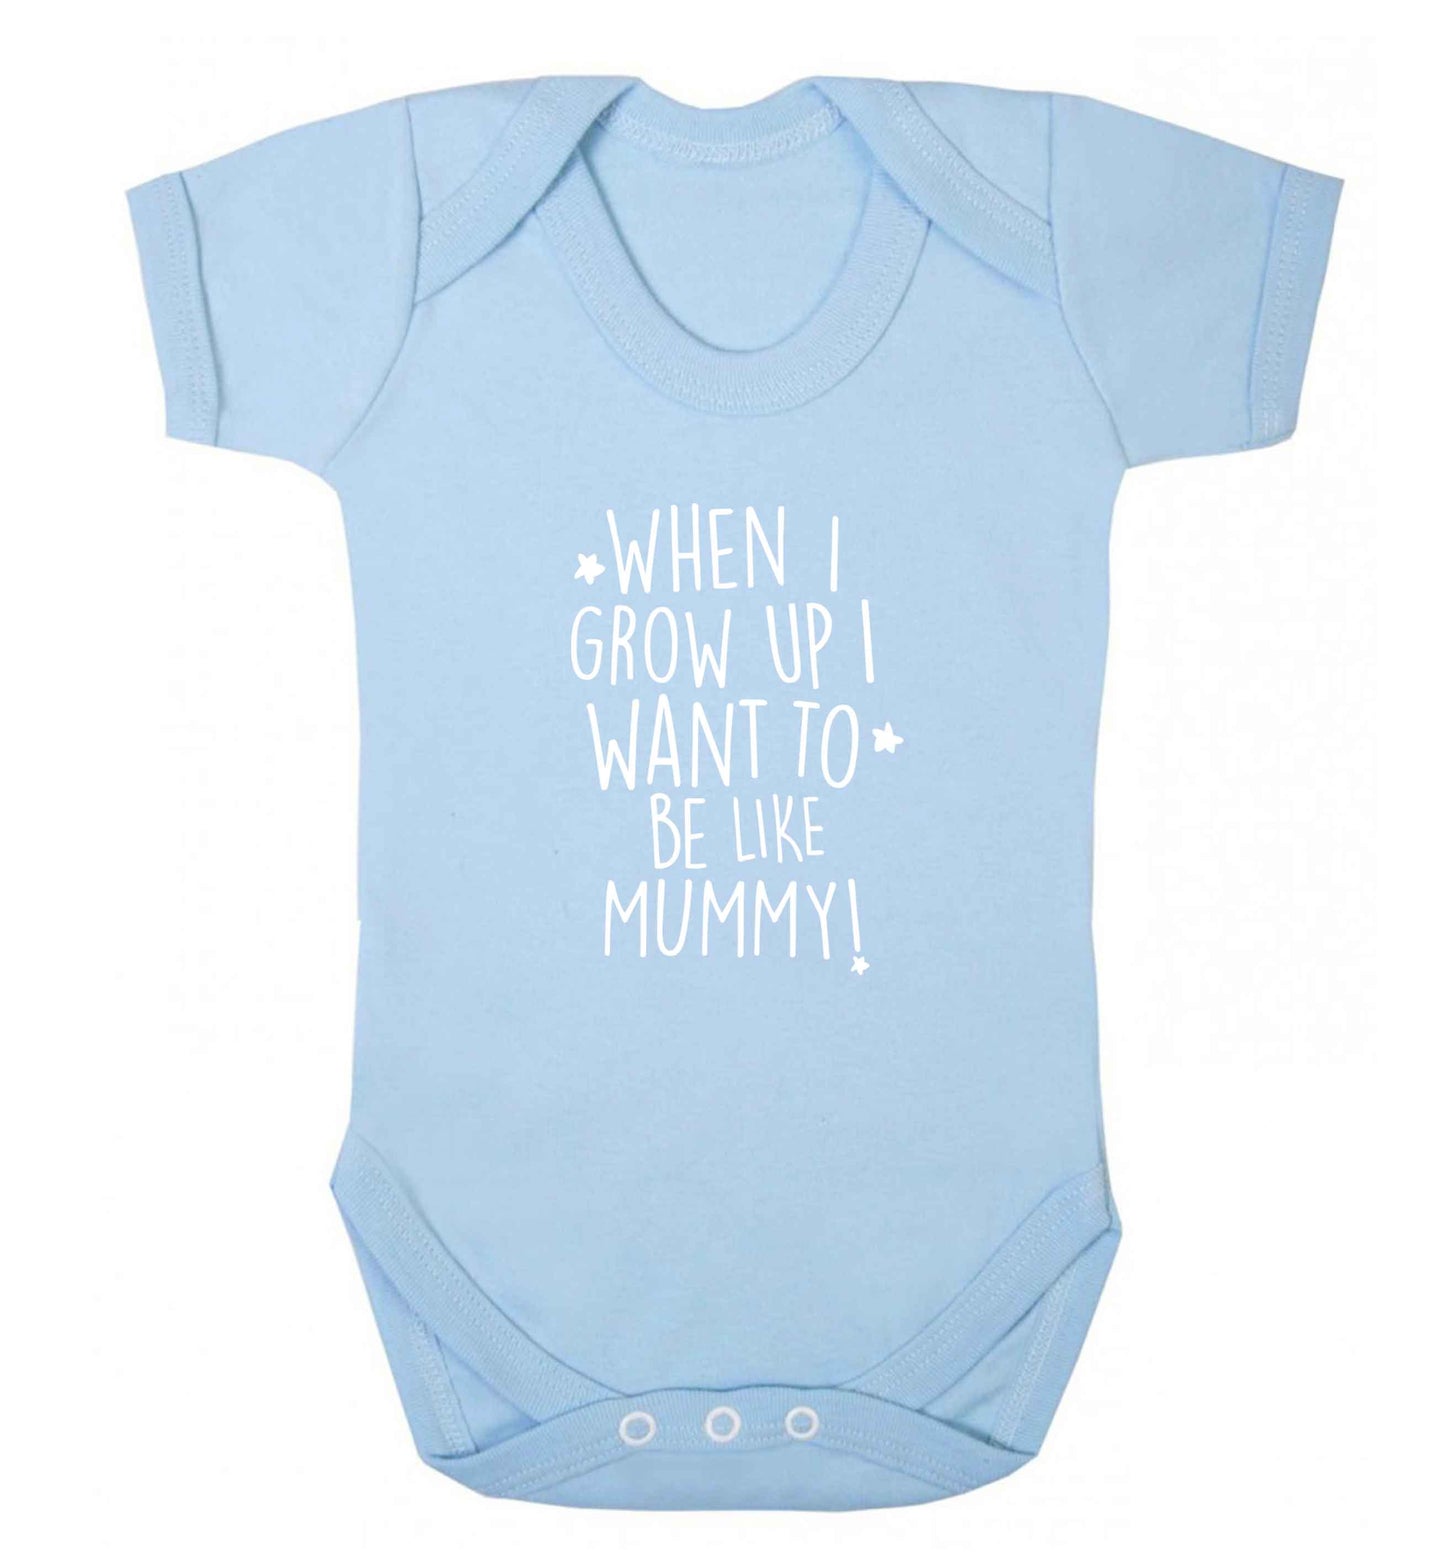 When I grow up I want to be like my mummy baby vest pale blue 18-24 months